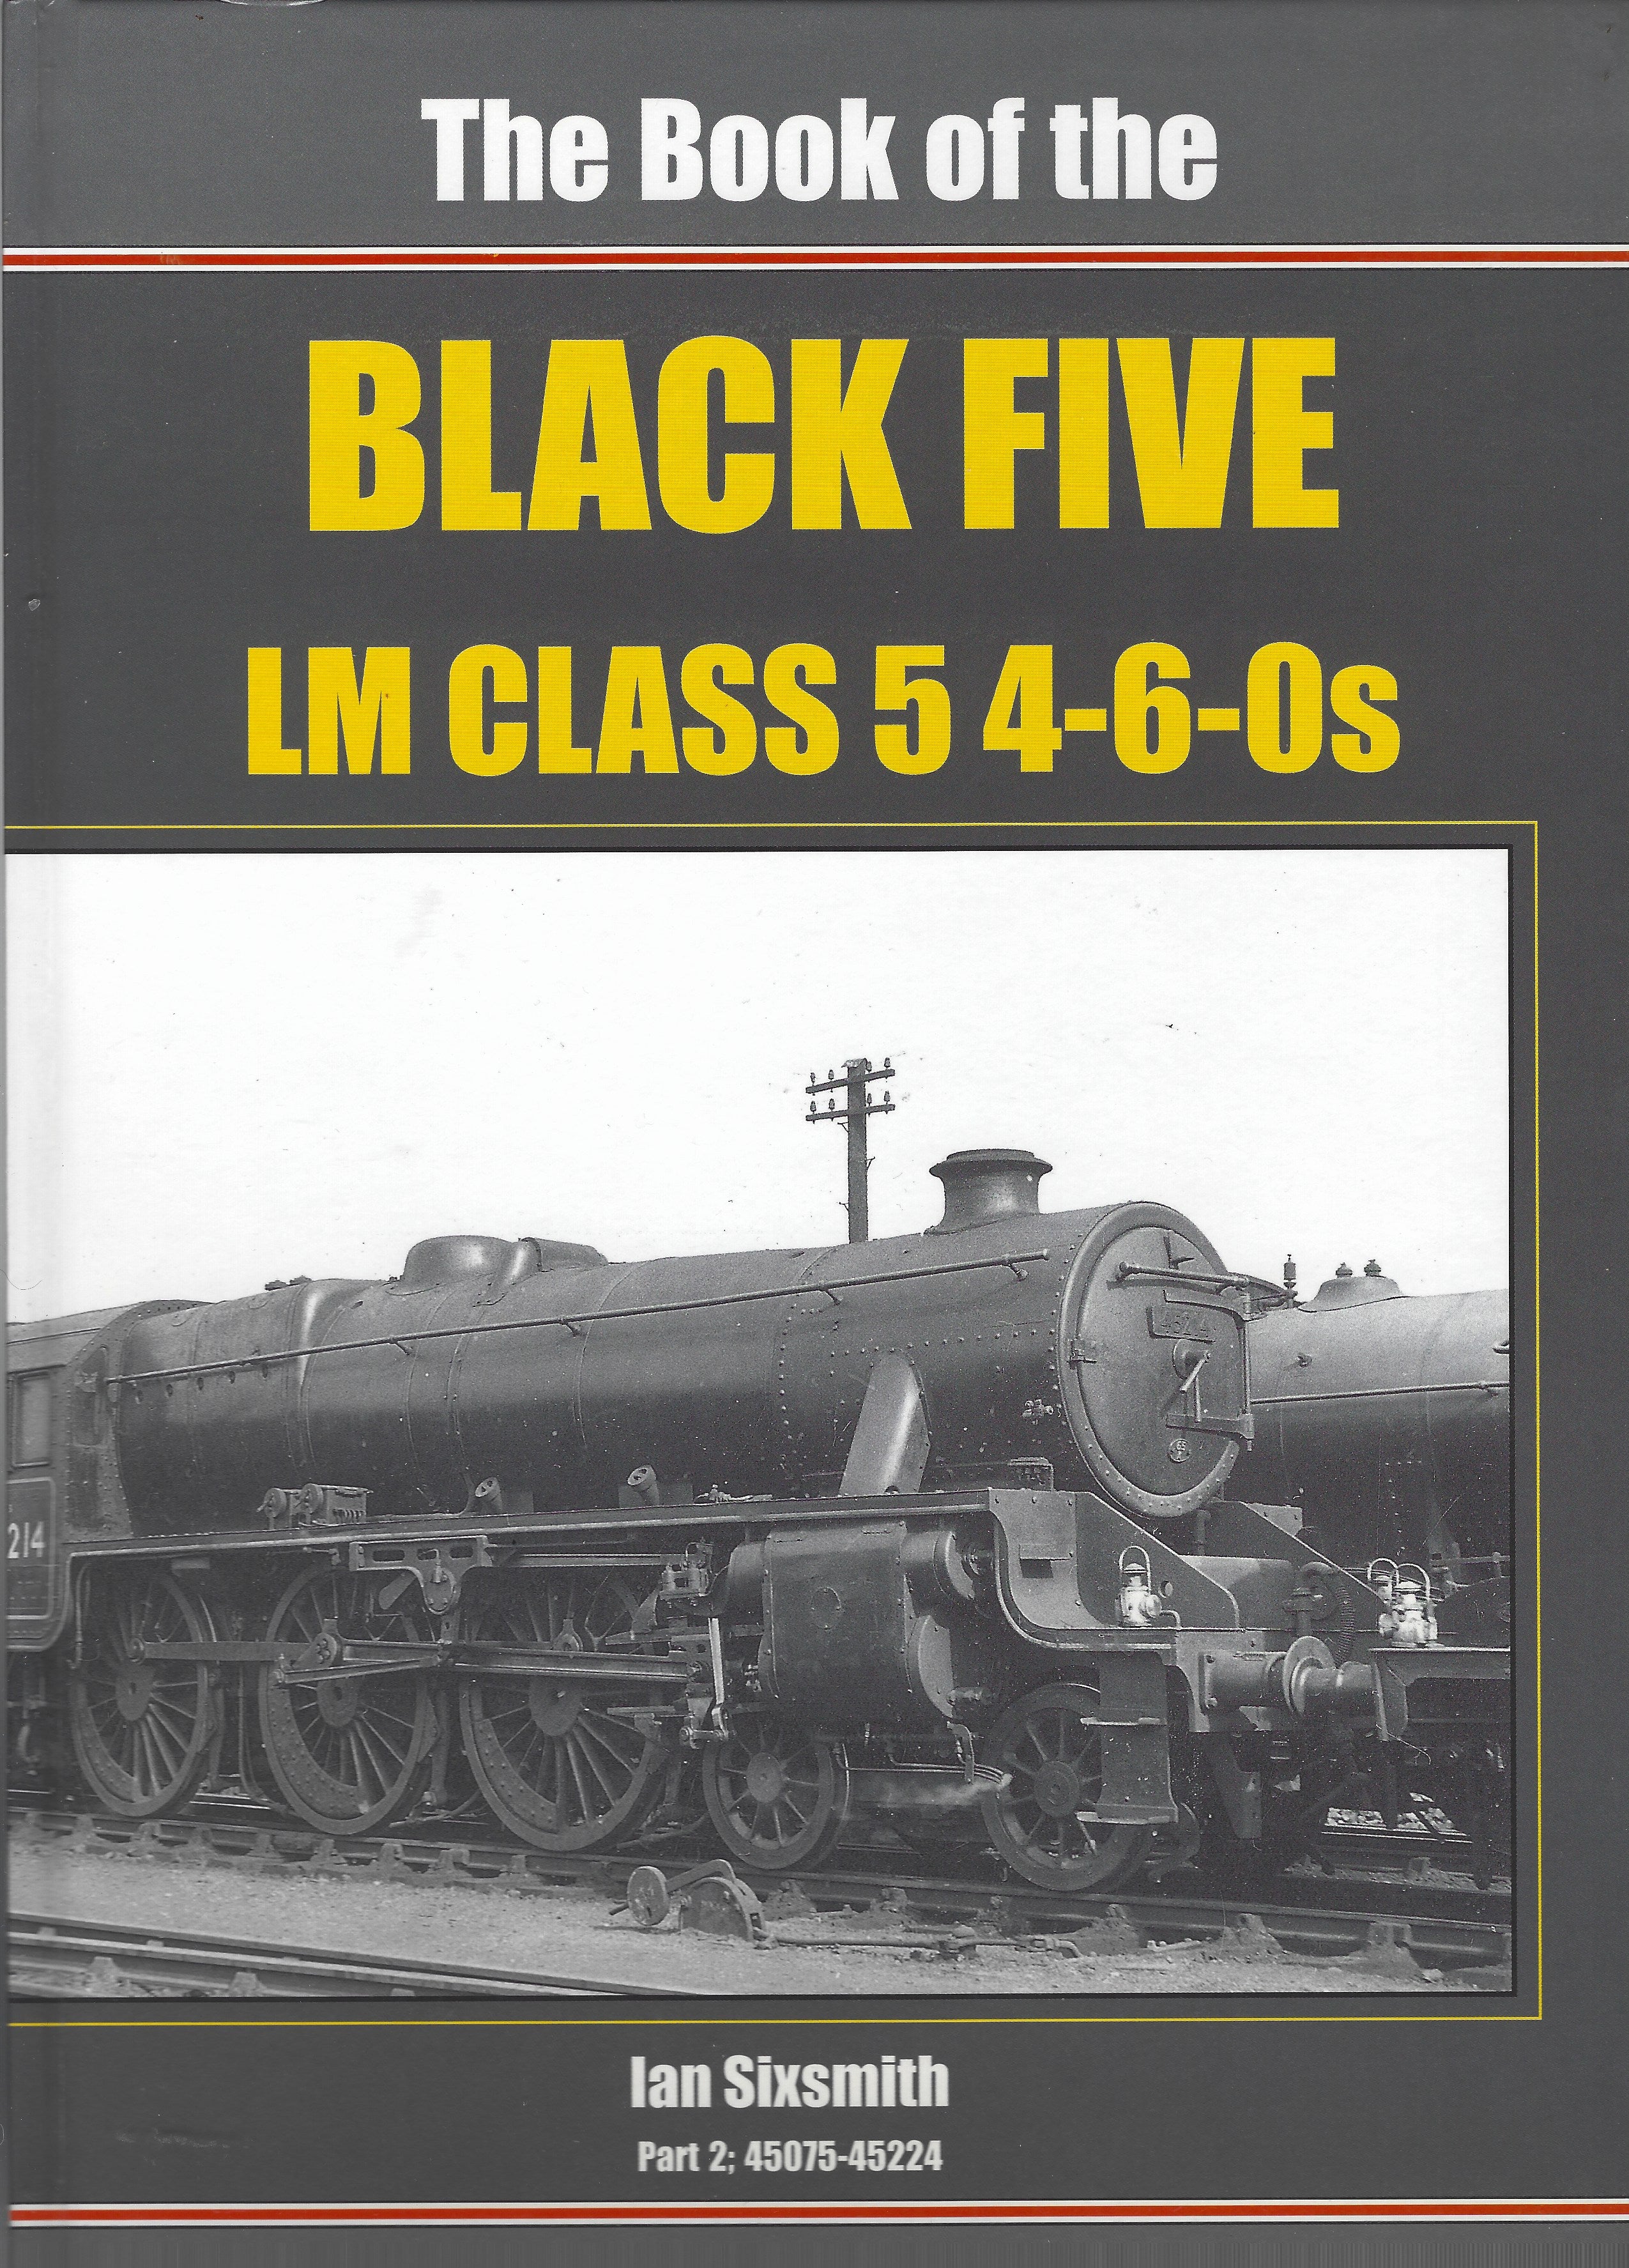 The Book of the BLACK FIVE 4-6-0s - Part 2 Nos. 45075 - 45224